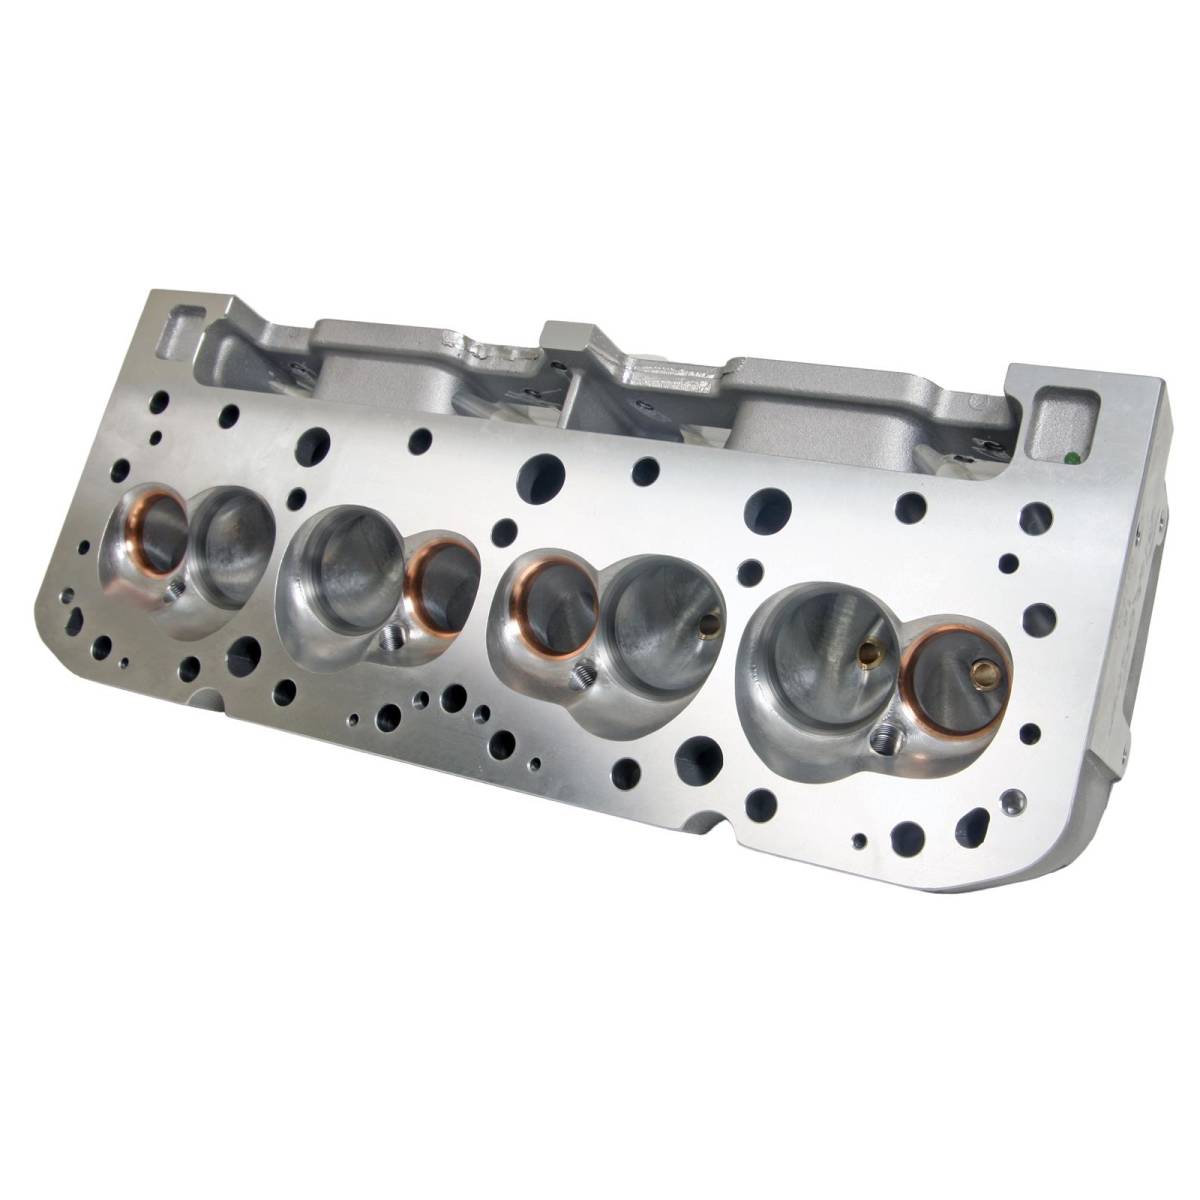 Trickflow - Trickflow Ultra 18 Cylinder Heads, SB Chevy, 250cc Intake, Bare - Image 1